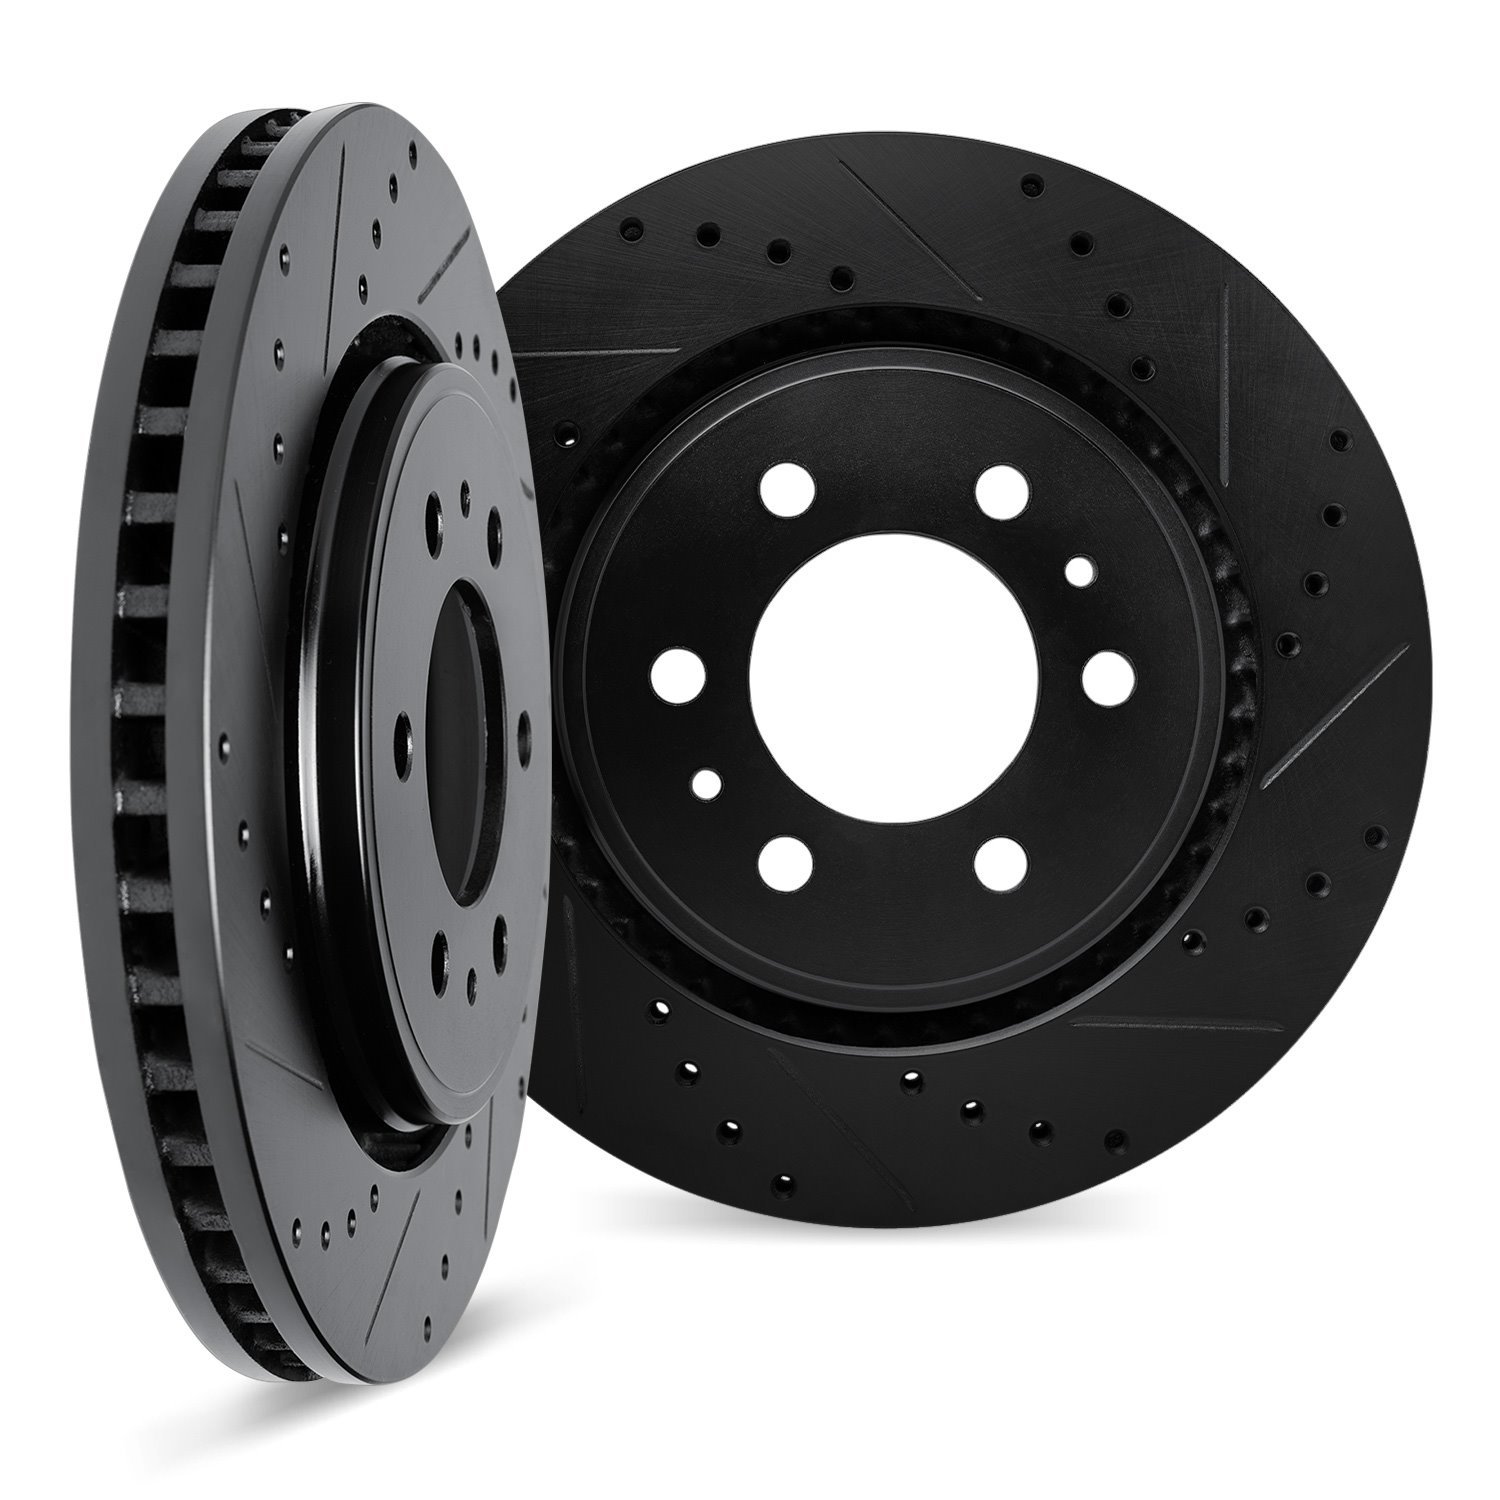 8002-47040 Drilled/Slotted Brake Rotors [Black], Fits Select GM, Position: Front